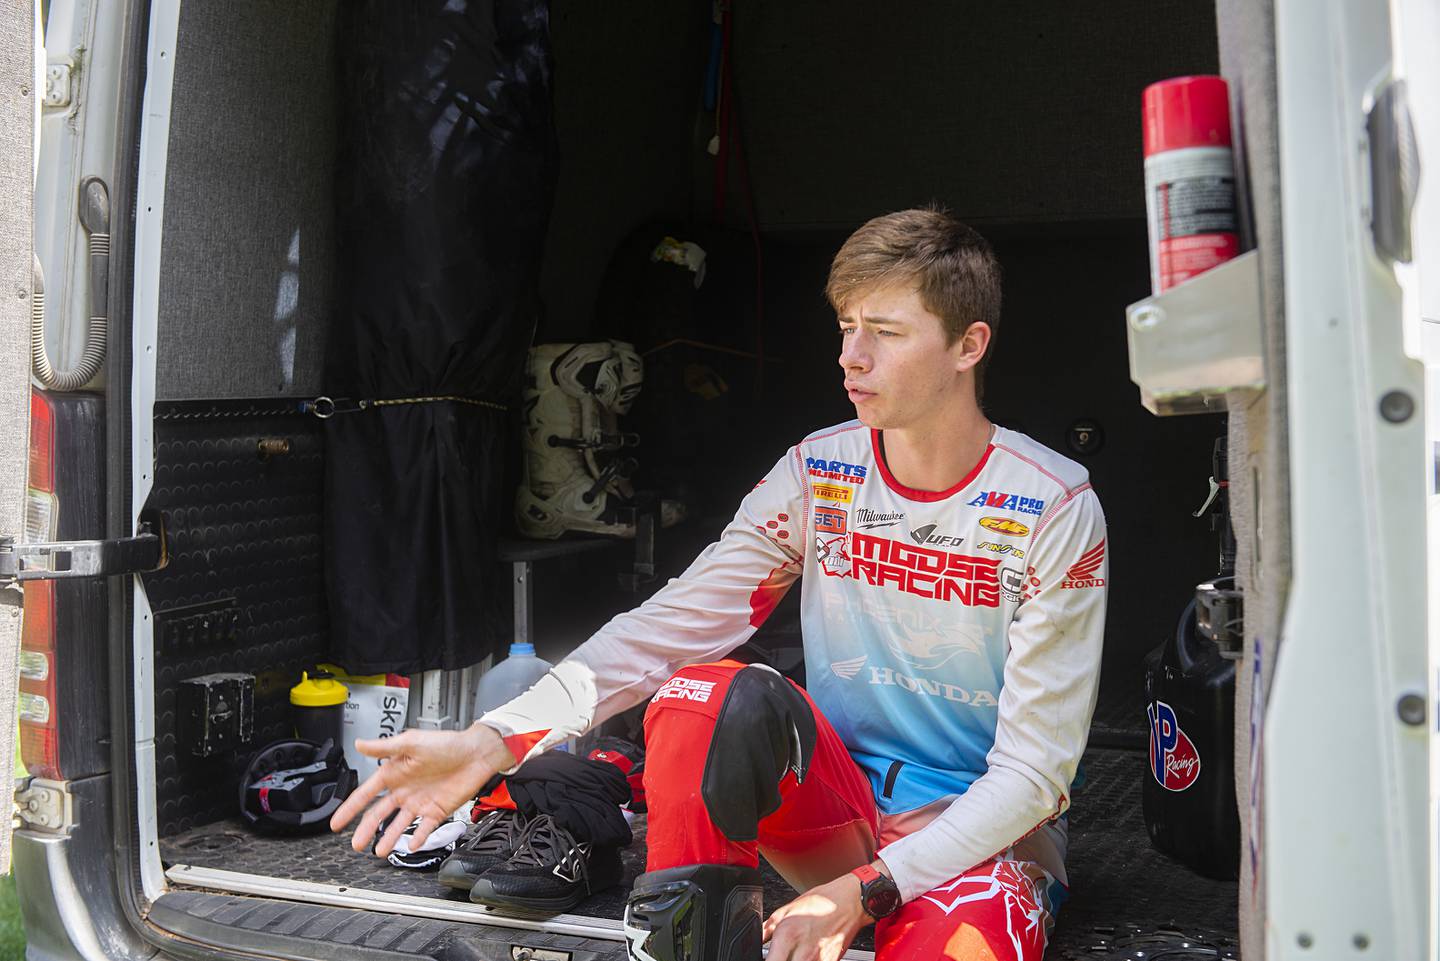 Cody Barnes talks about the work he has put in to become a professional motocross racer.